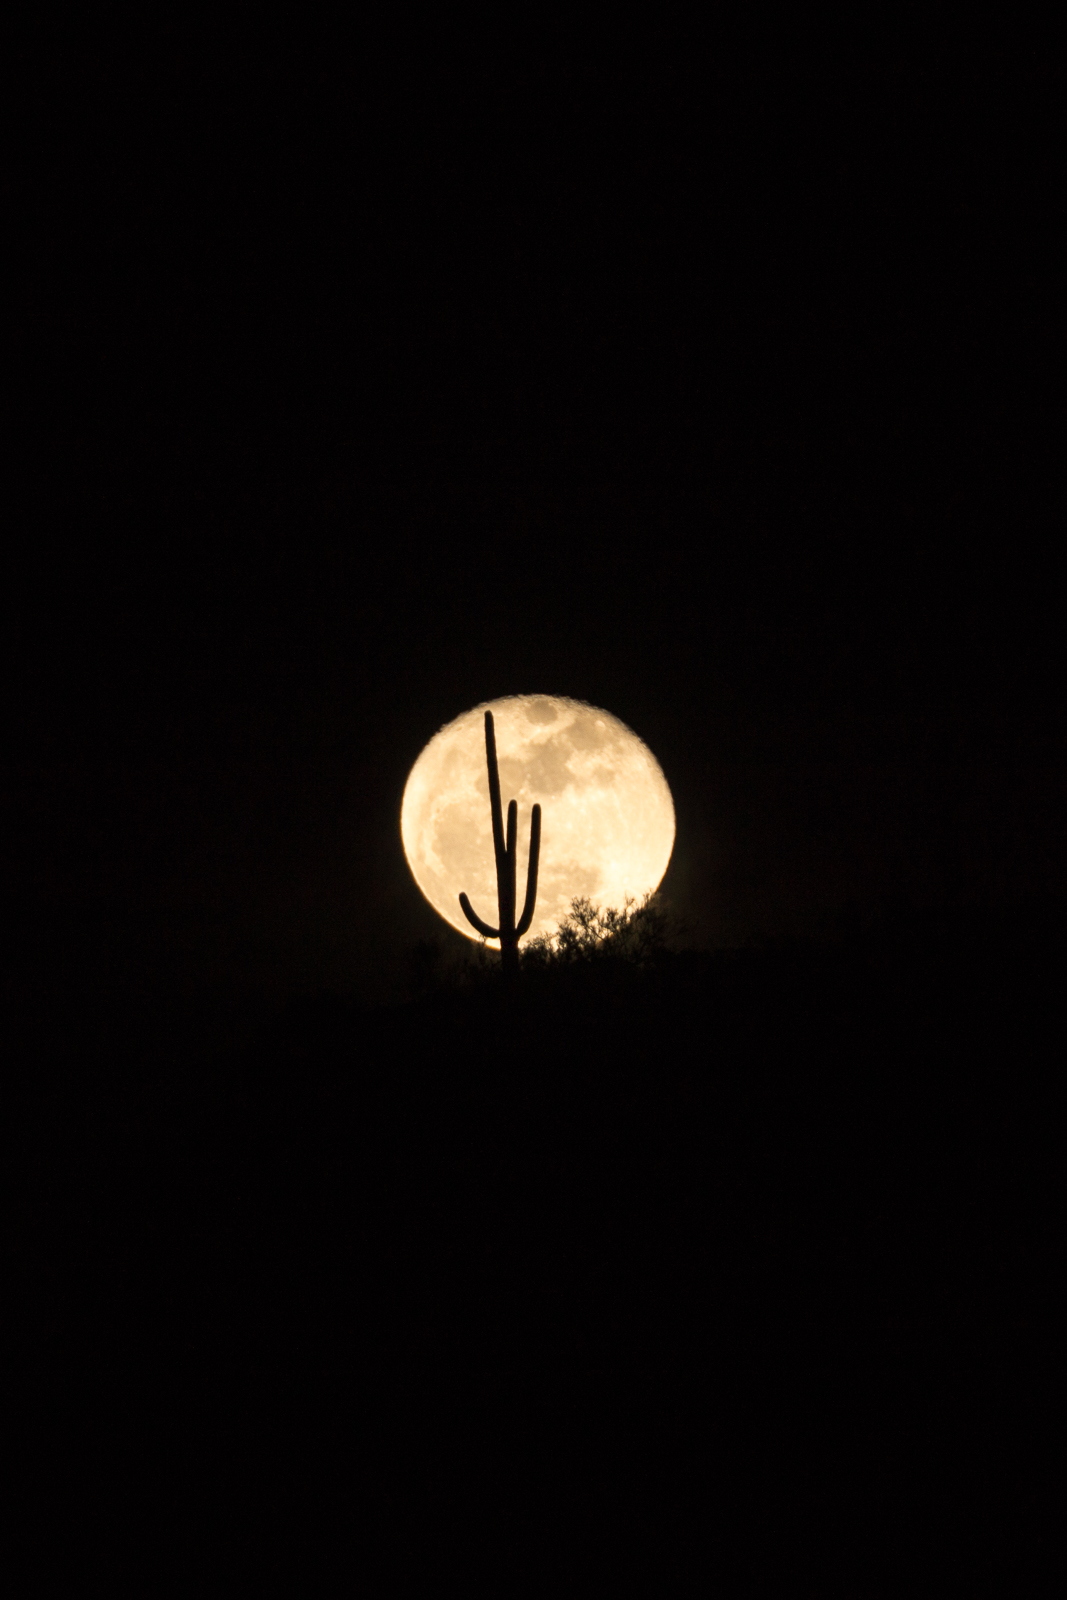 A Saguaro in the Moon - moonrise above Bear Canyon. December 2015.